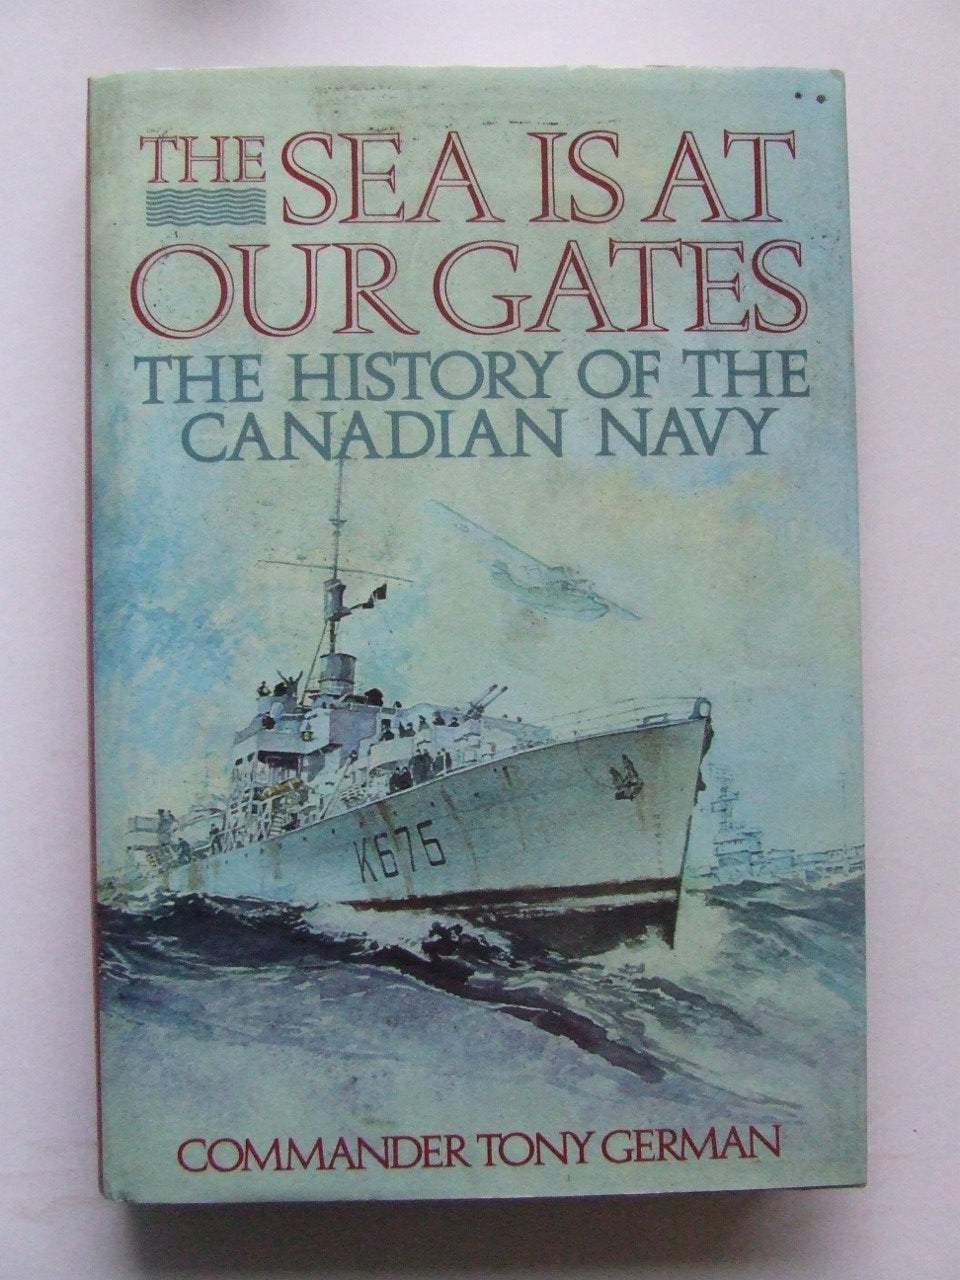 The Sea is at our Gates, the History of the Canadian Navy